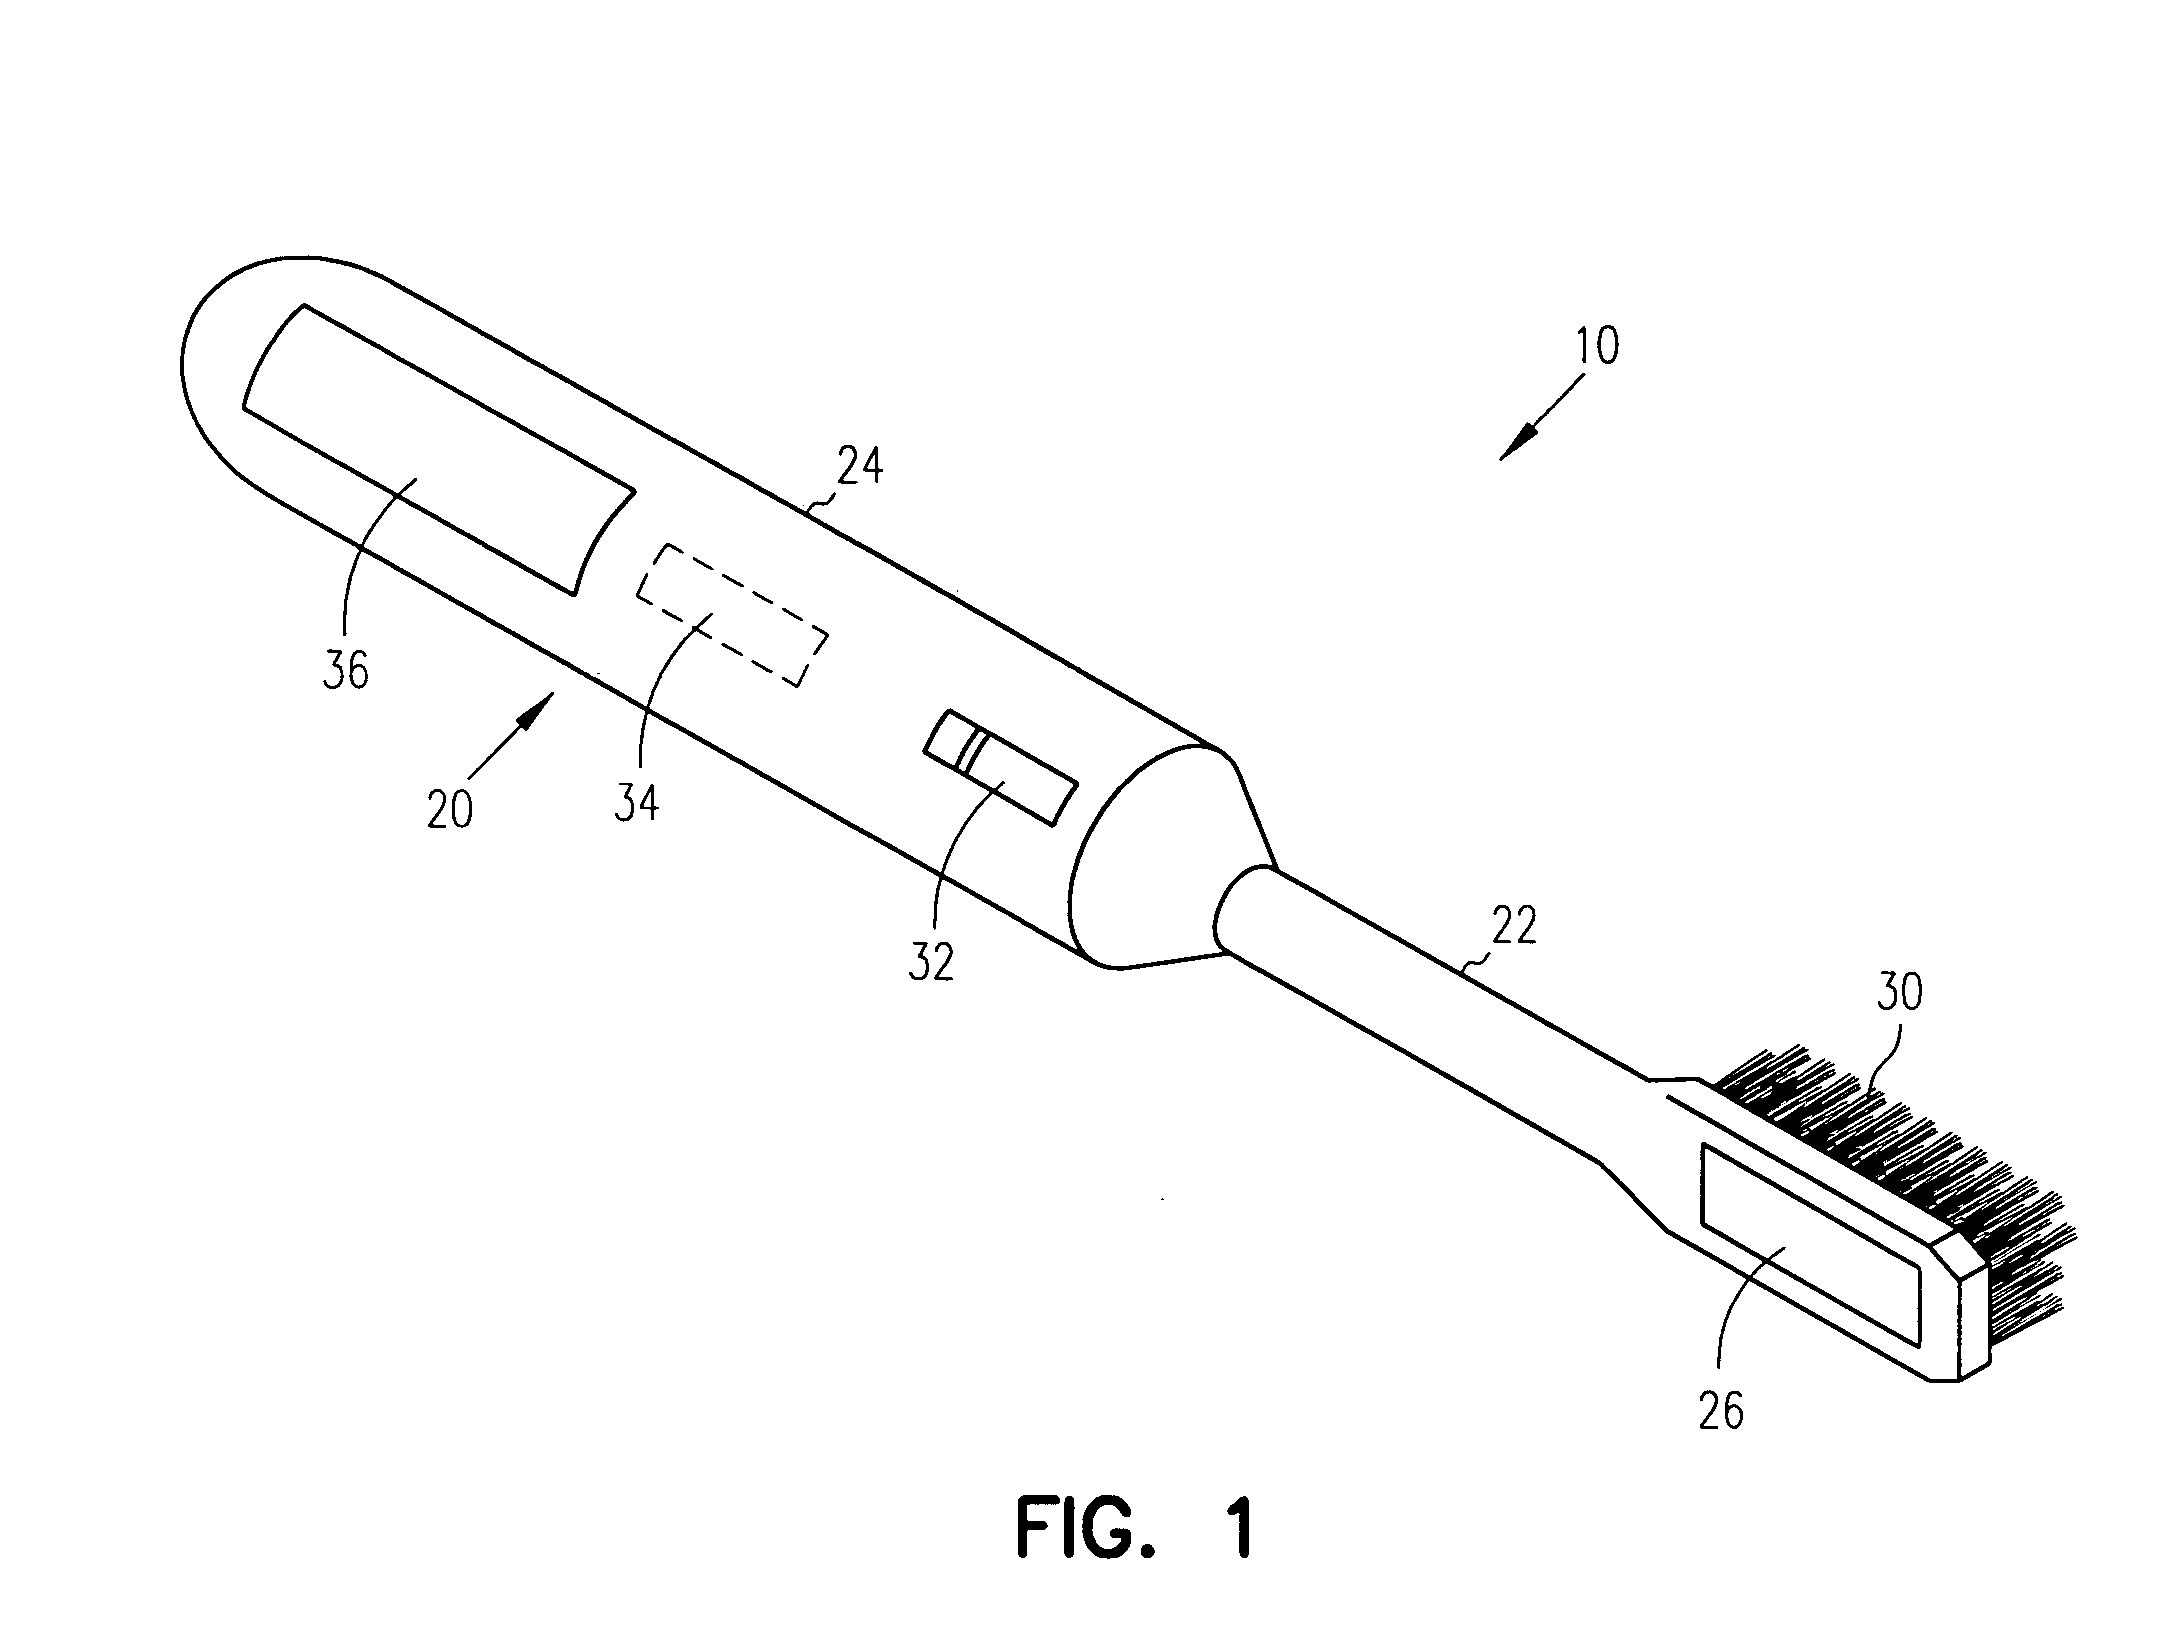 System and method for detecting substances related to oral health